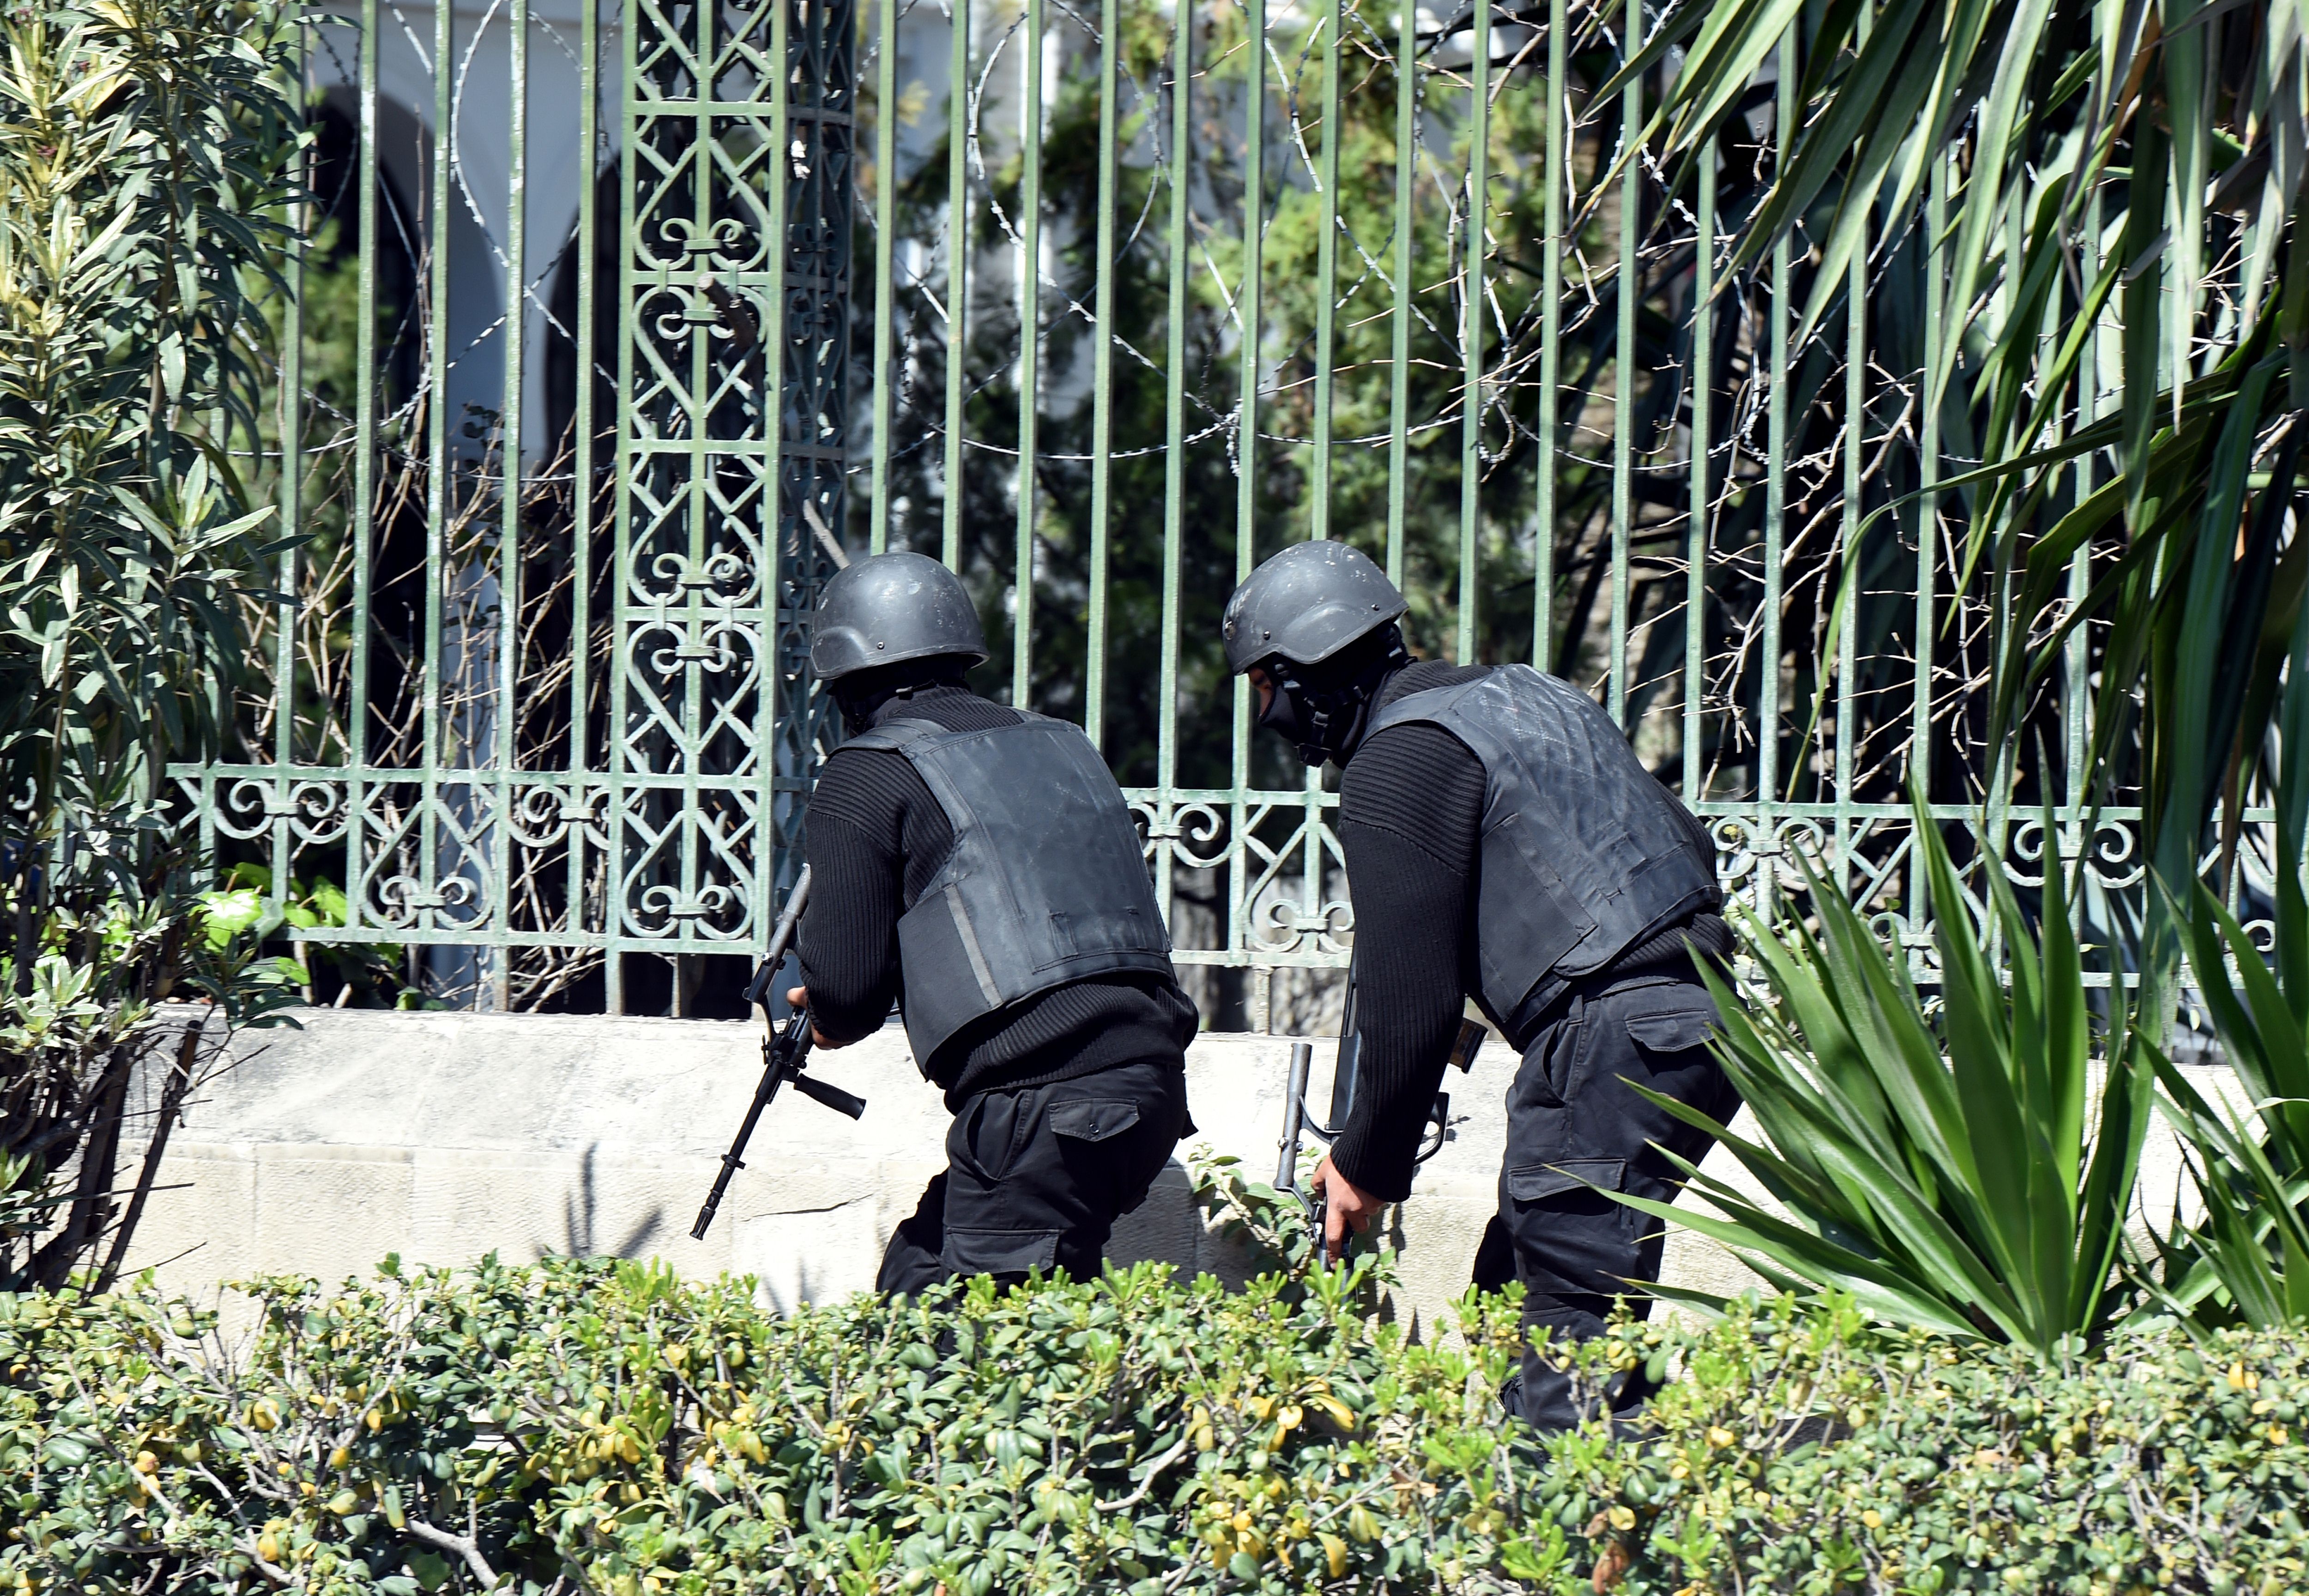 Tunisian security forces and military personnel outside the Bardo Museum. (Getty)